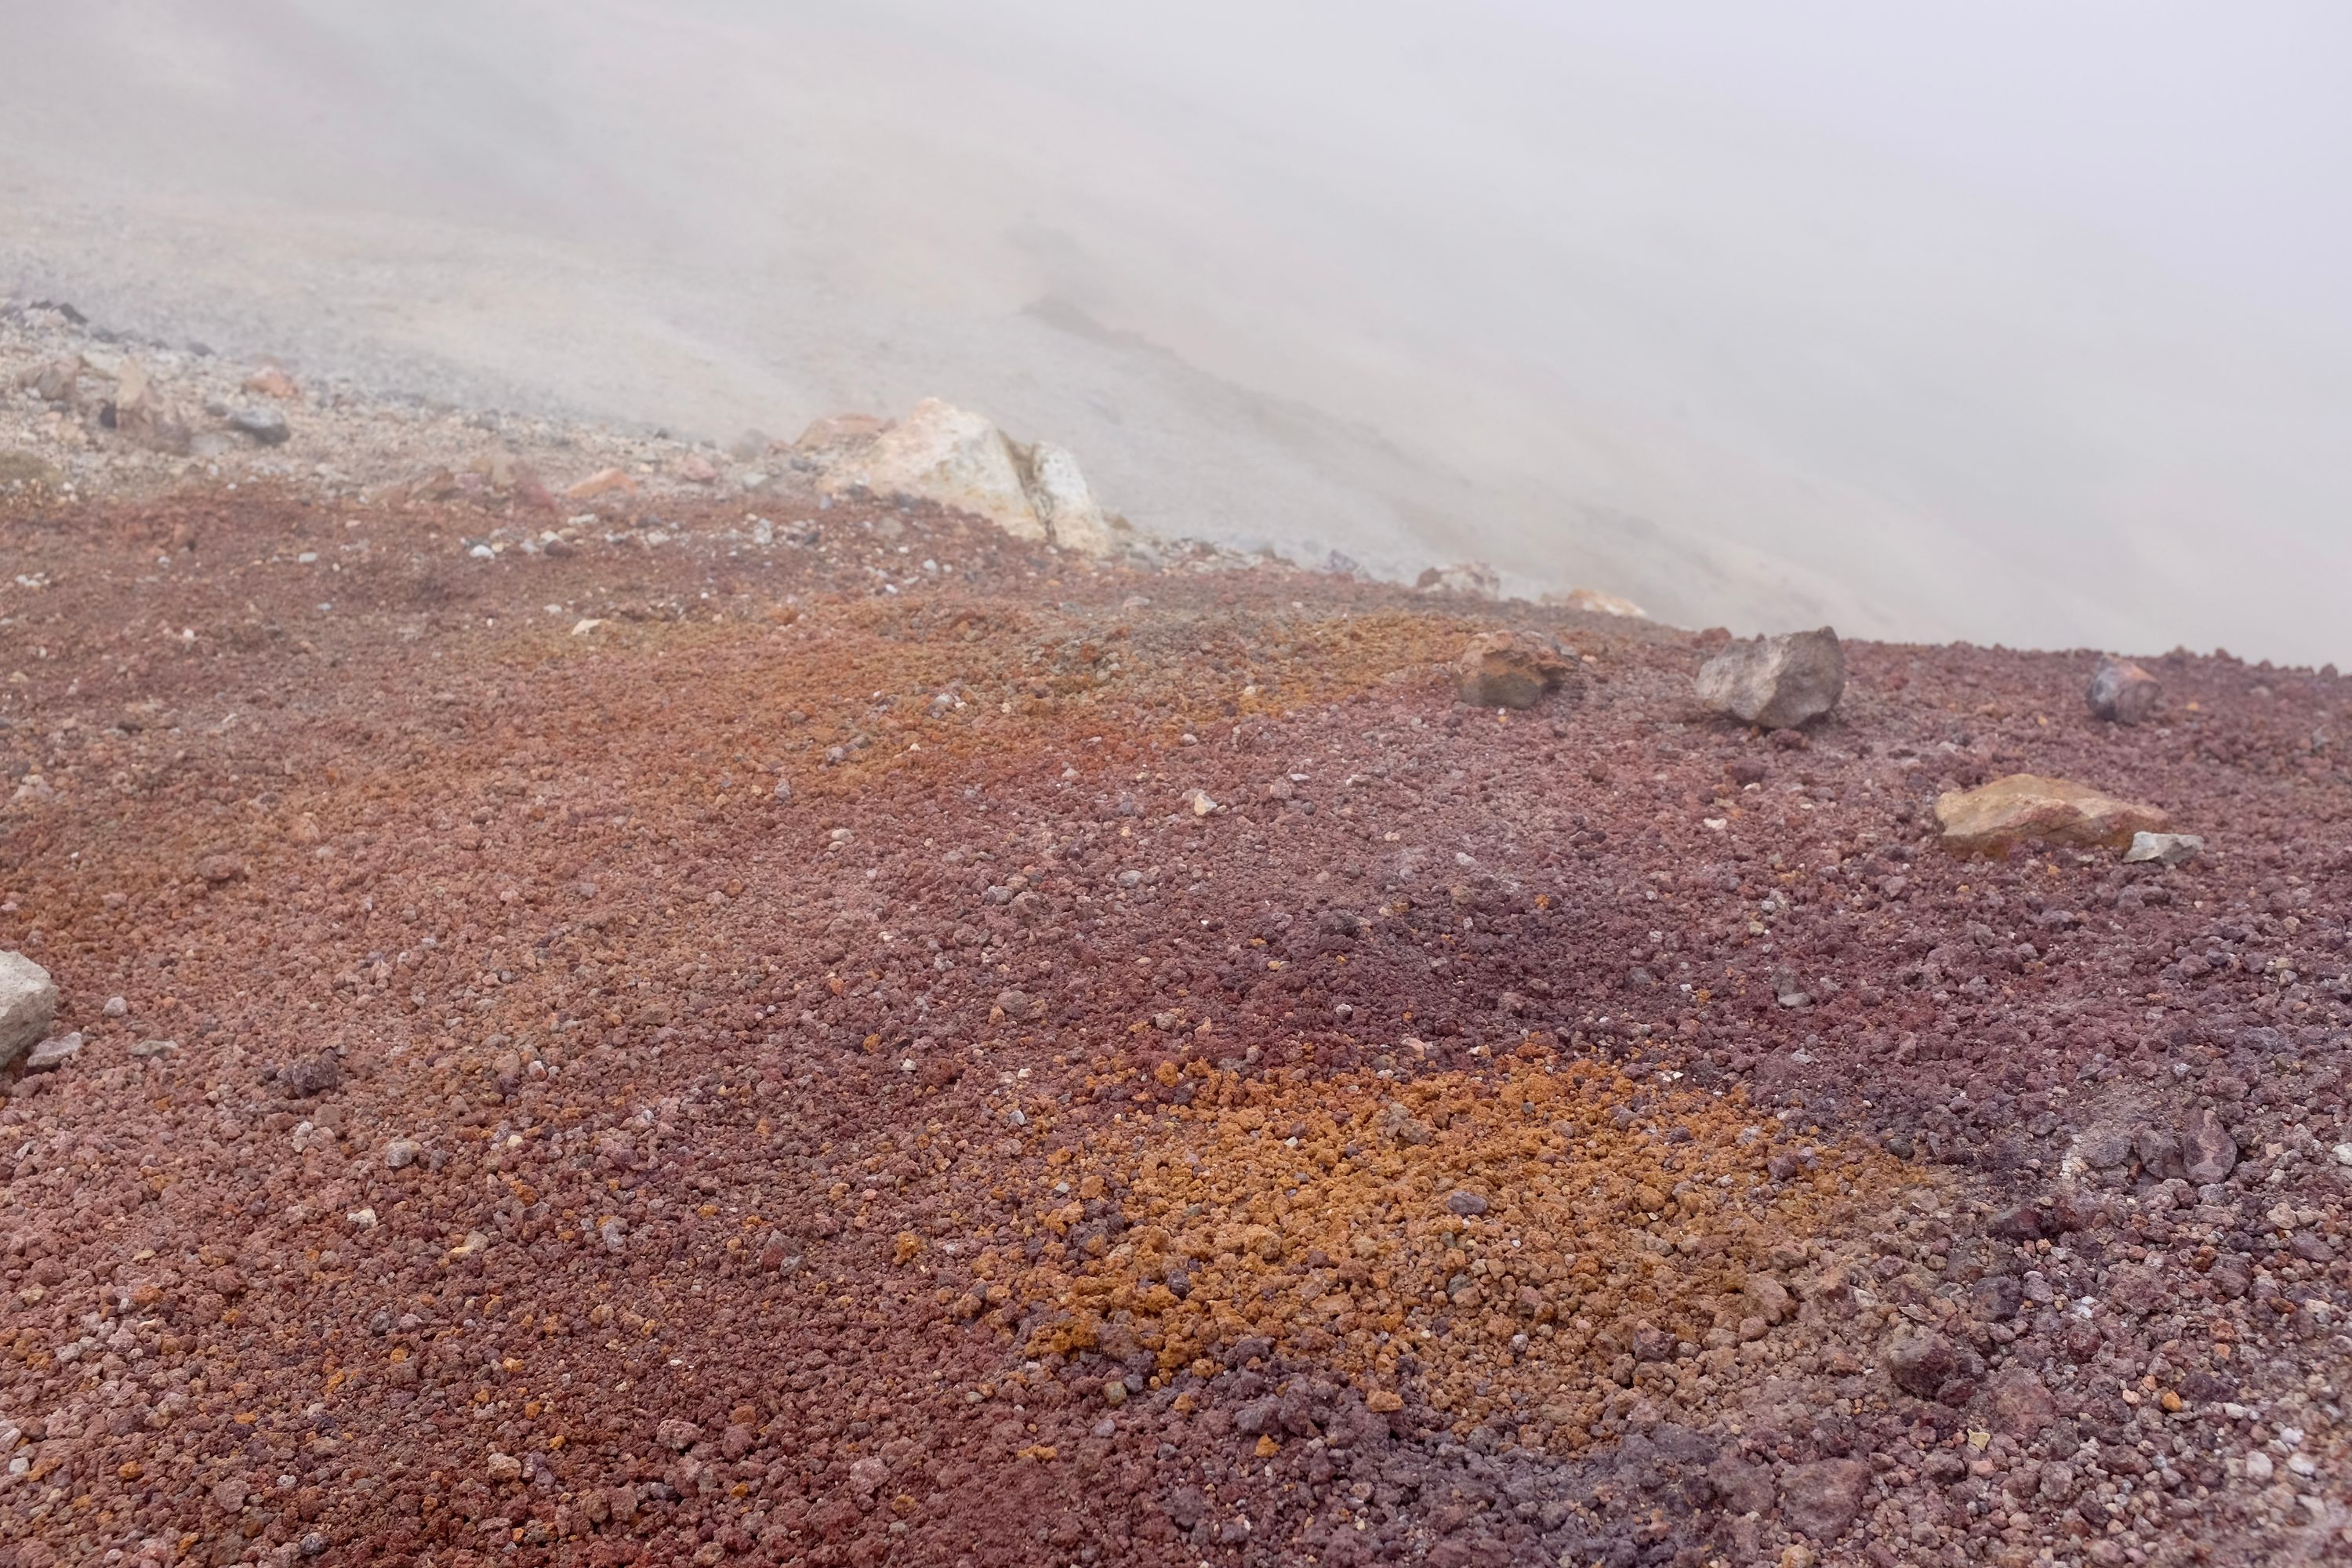 Colorful volcanic scree on the ground.